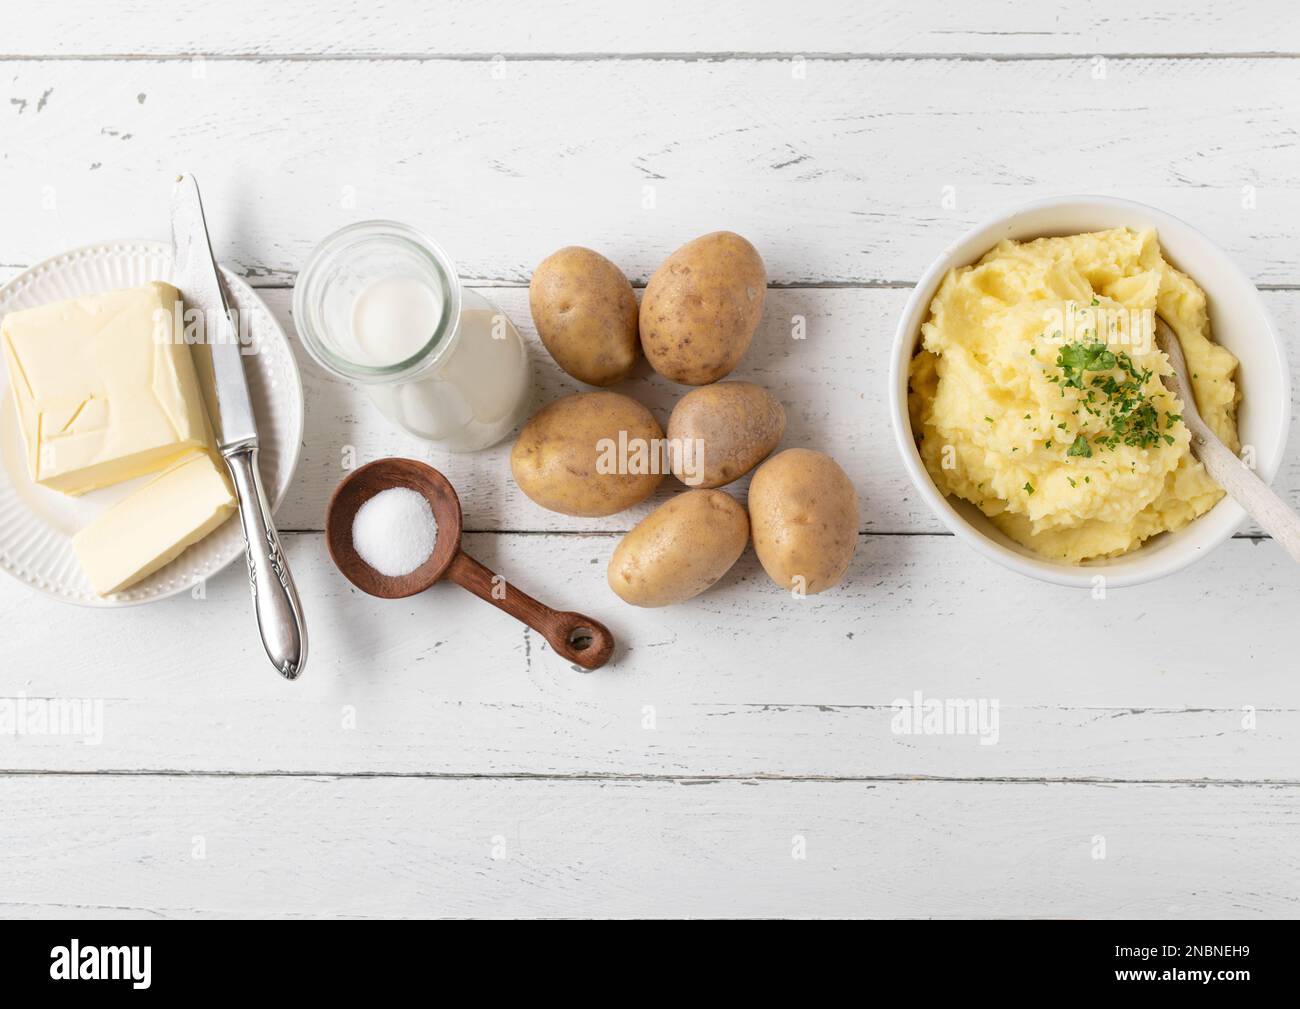 Ingredients for cooking or making mashed potatoes on white background with space for text. Flat lay Stock Photo